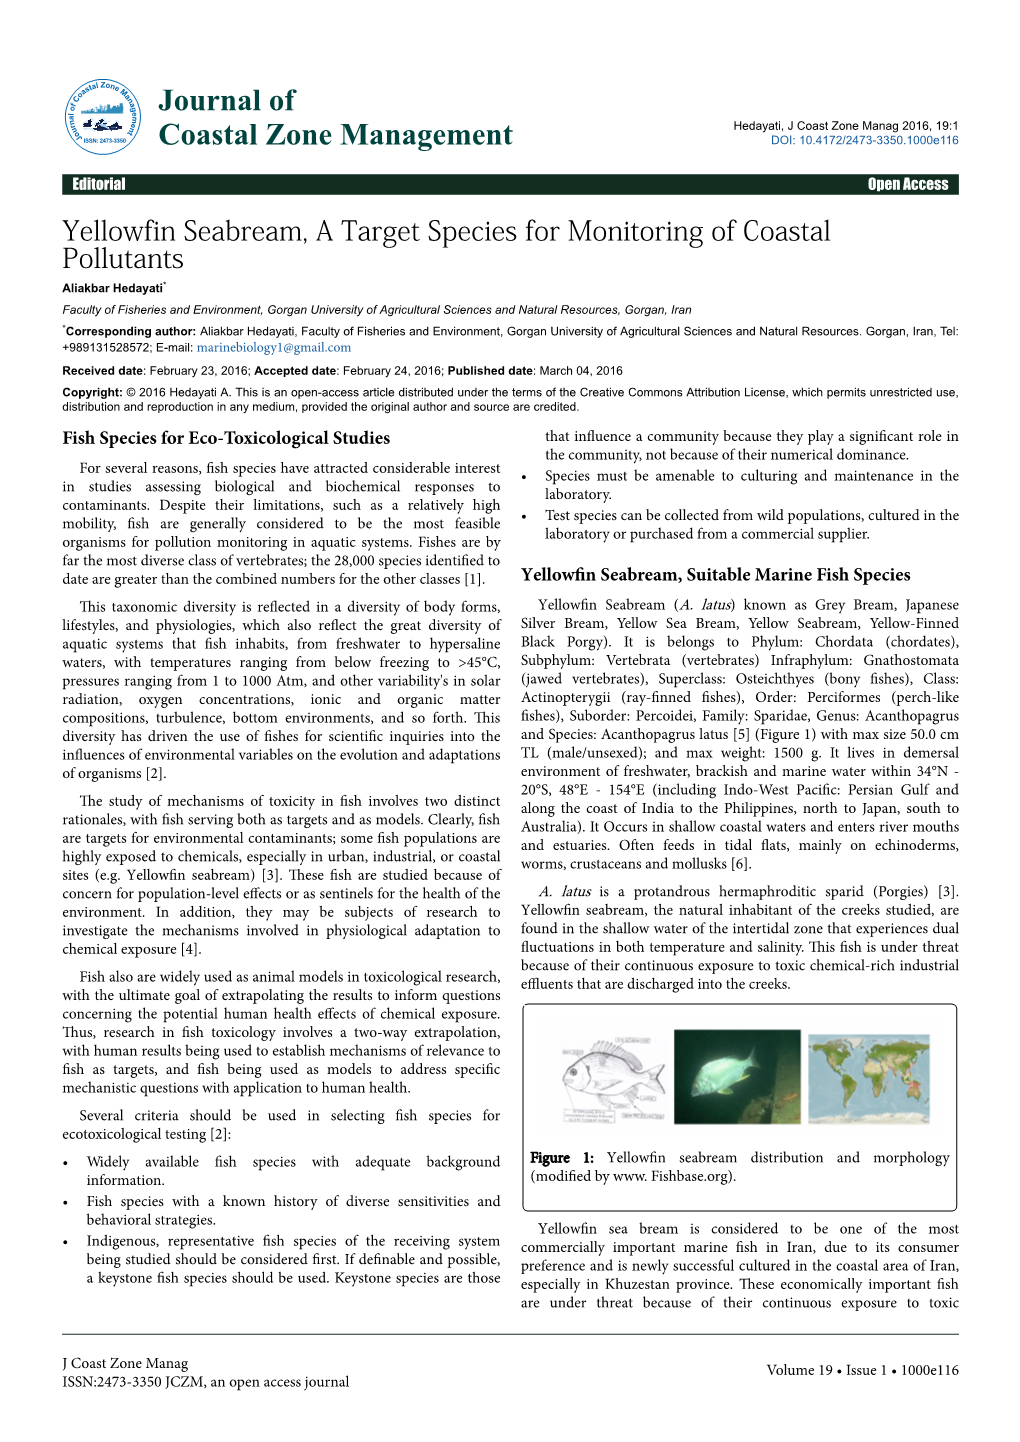 Yellowfin Seabream, a Target Species for Monitoring of Coastal Pollutants